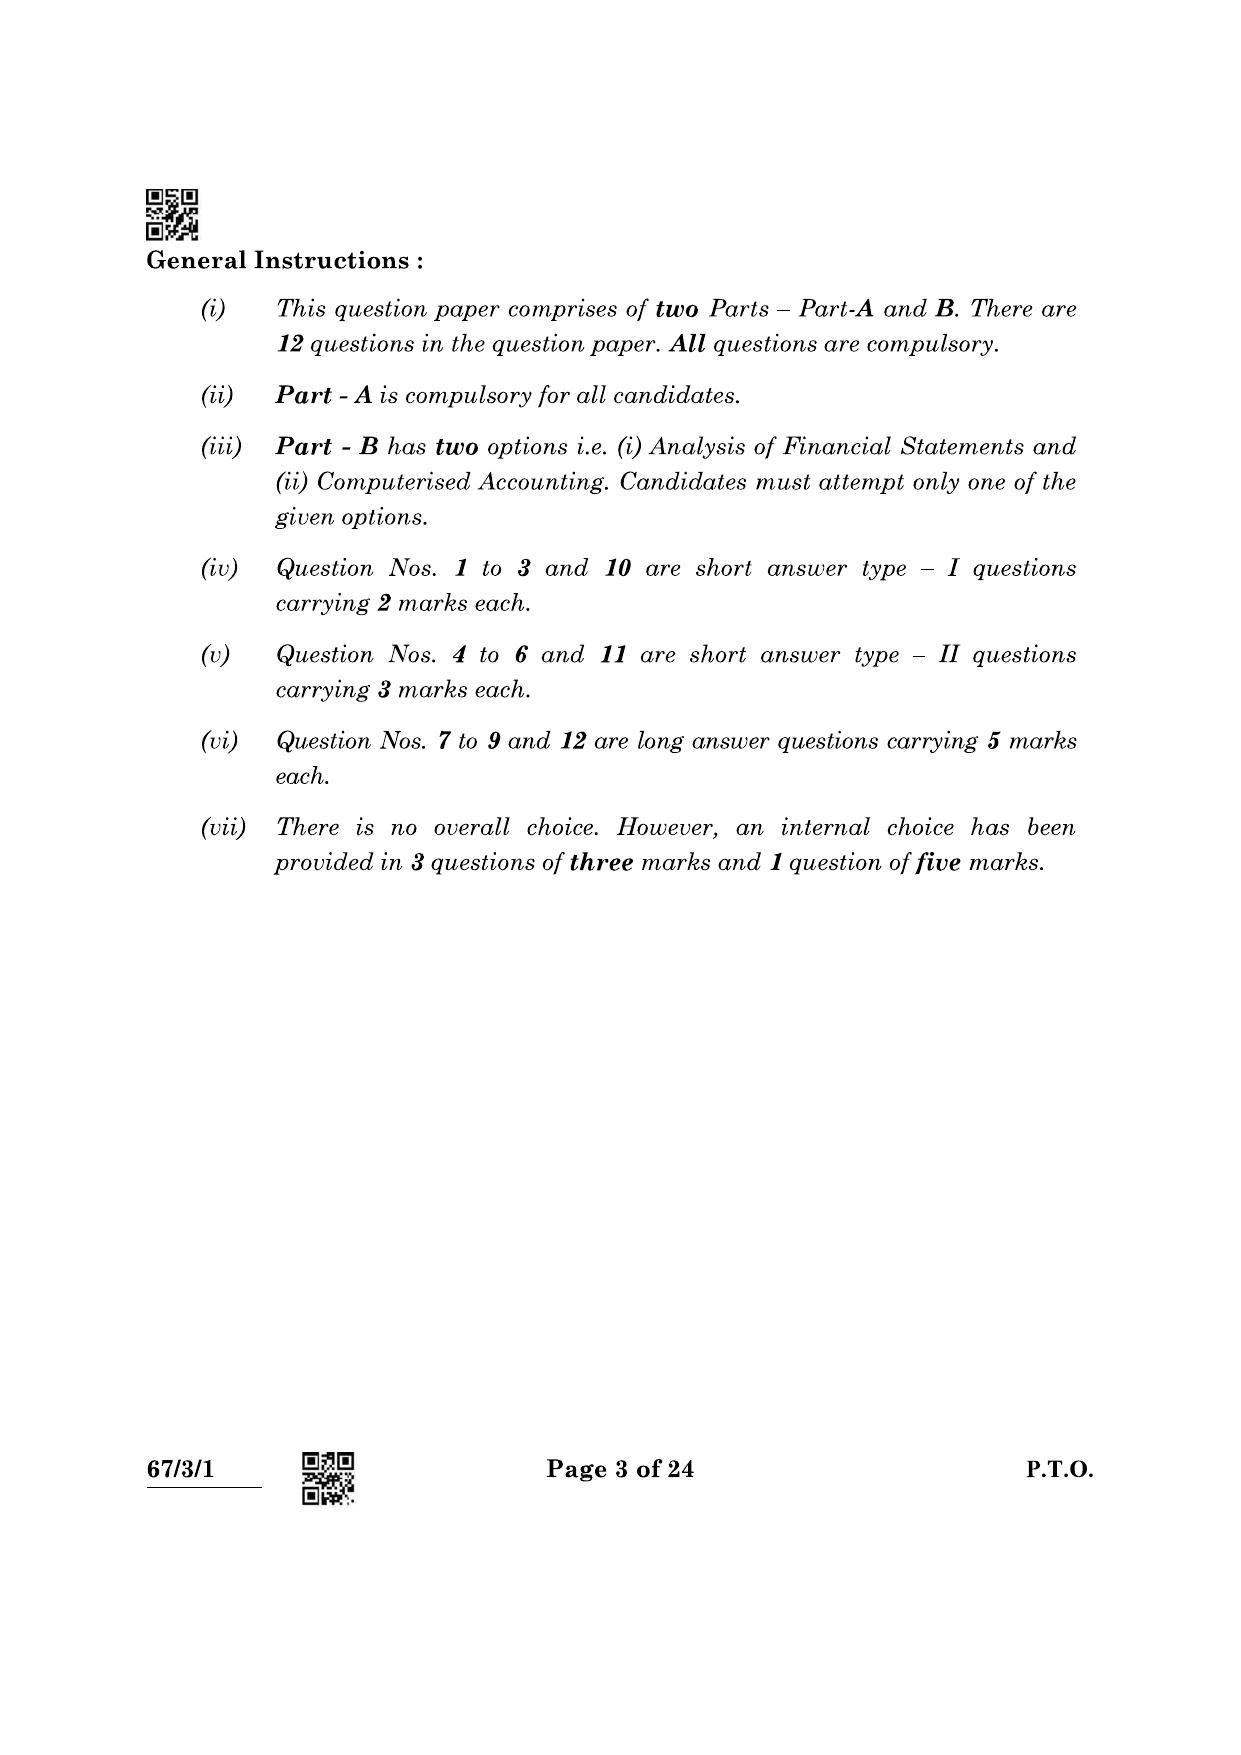 CBSE Class 12 67-3-1 Accountancy 2022 Question Paper - Page 3